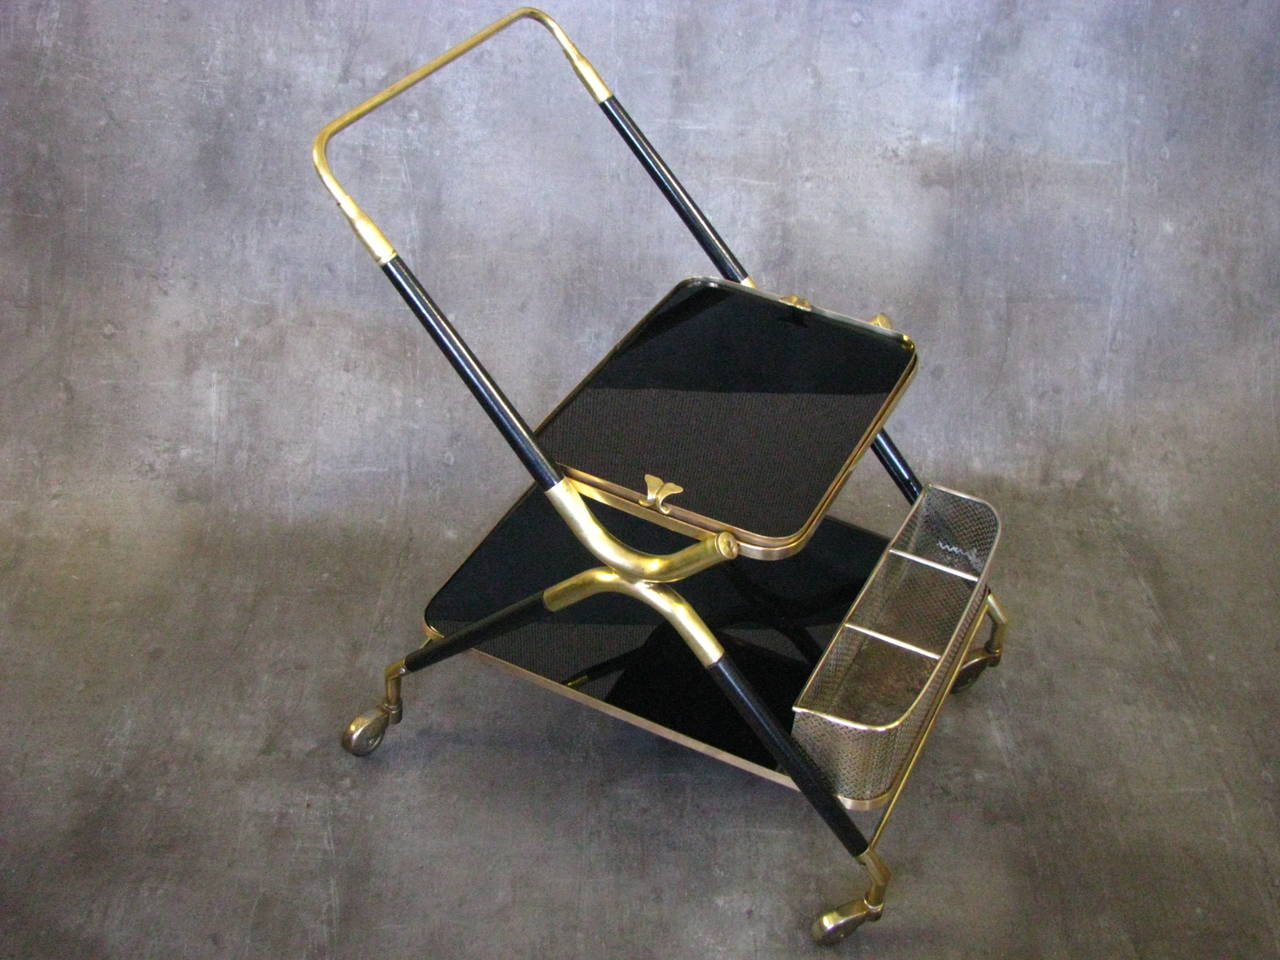 Bar cart from the 1950s designed by of Cesare Lacca. Good vintage condition, brass with patina due to age and use. The four wheels roll freely. Original glass plates. removable tray.

Dimensions: Width: 17.3 in (44cm).
Length: 27.6 in (70